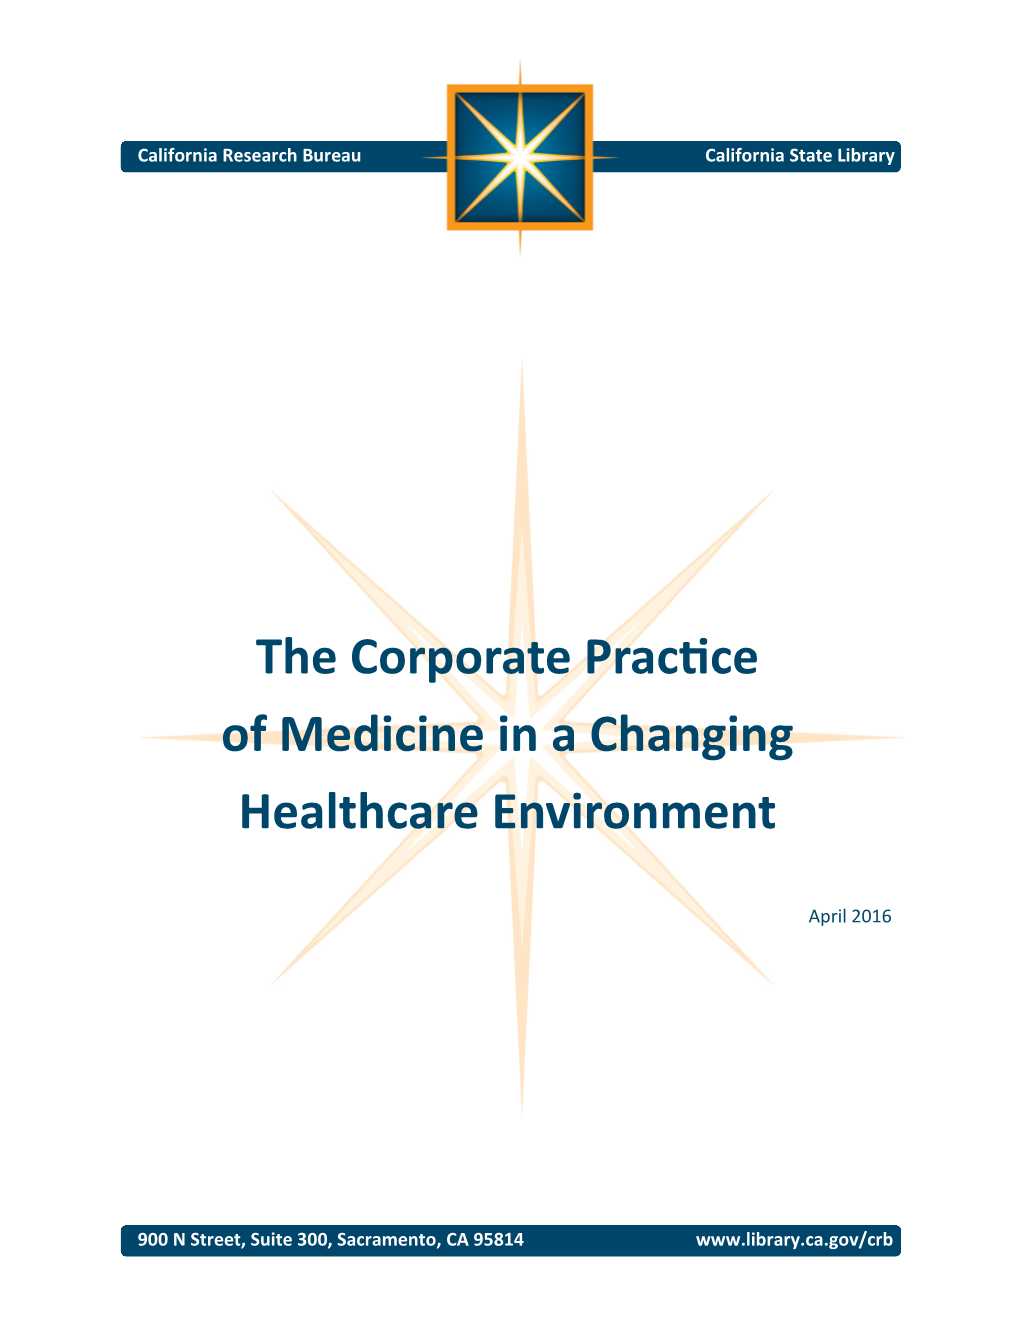 The Corporate Practice of Medicine in a Changing Healthcare Environment